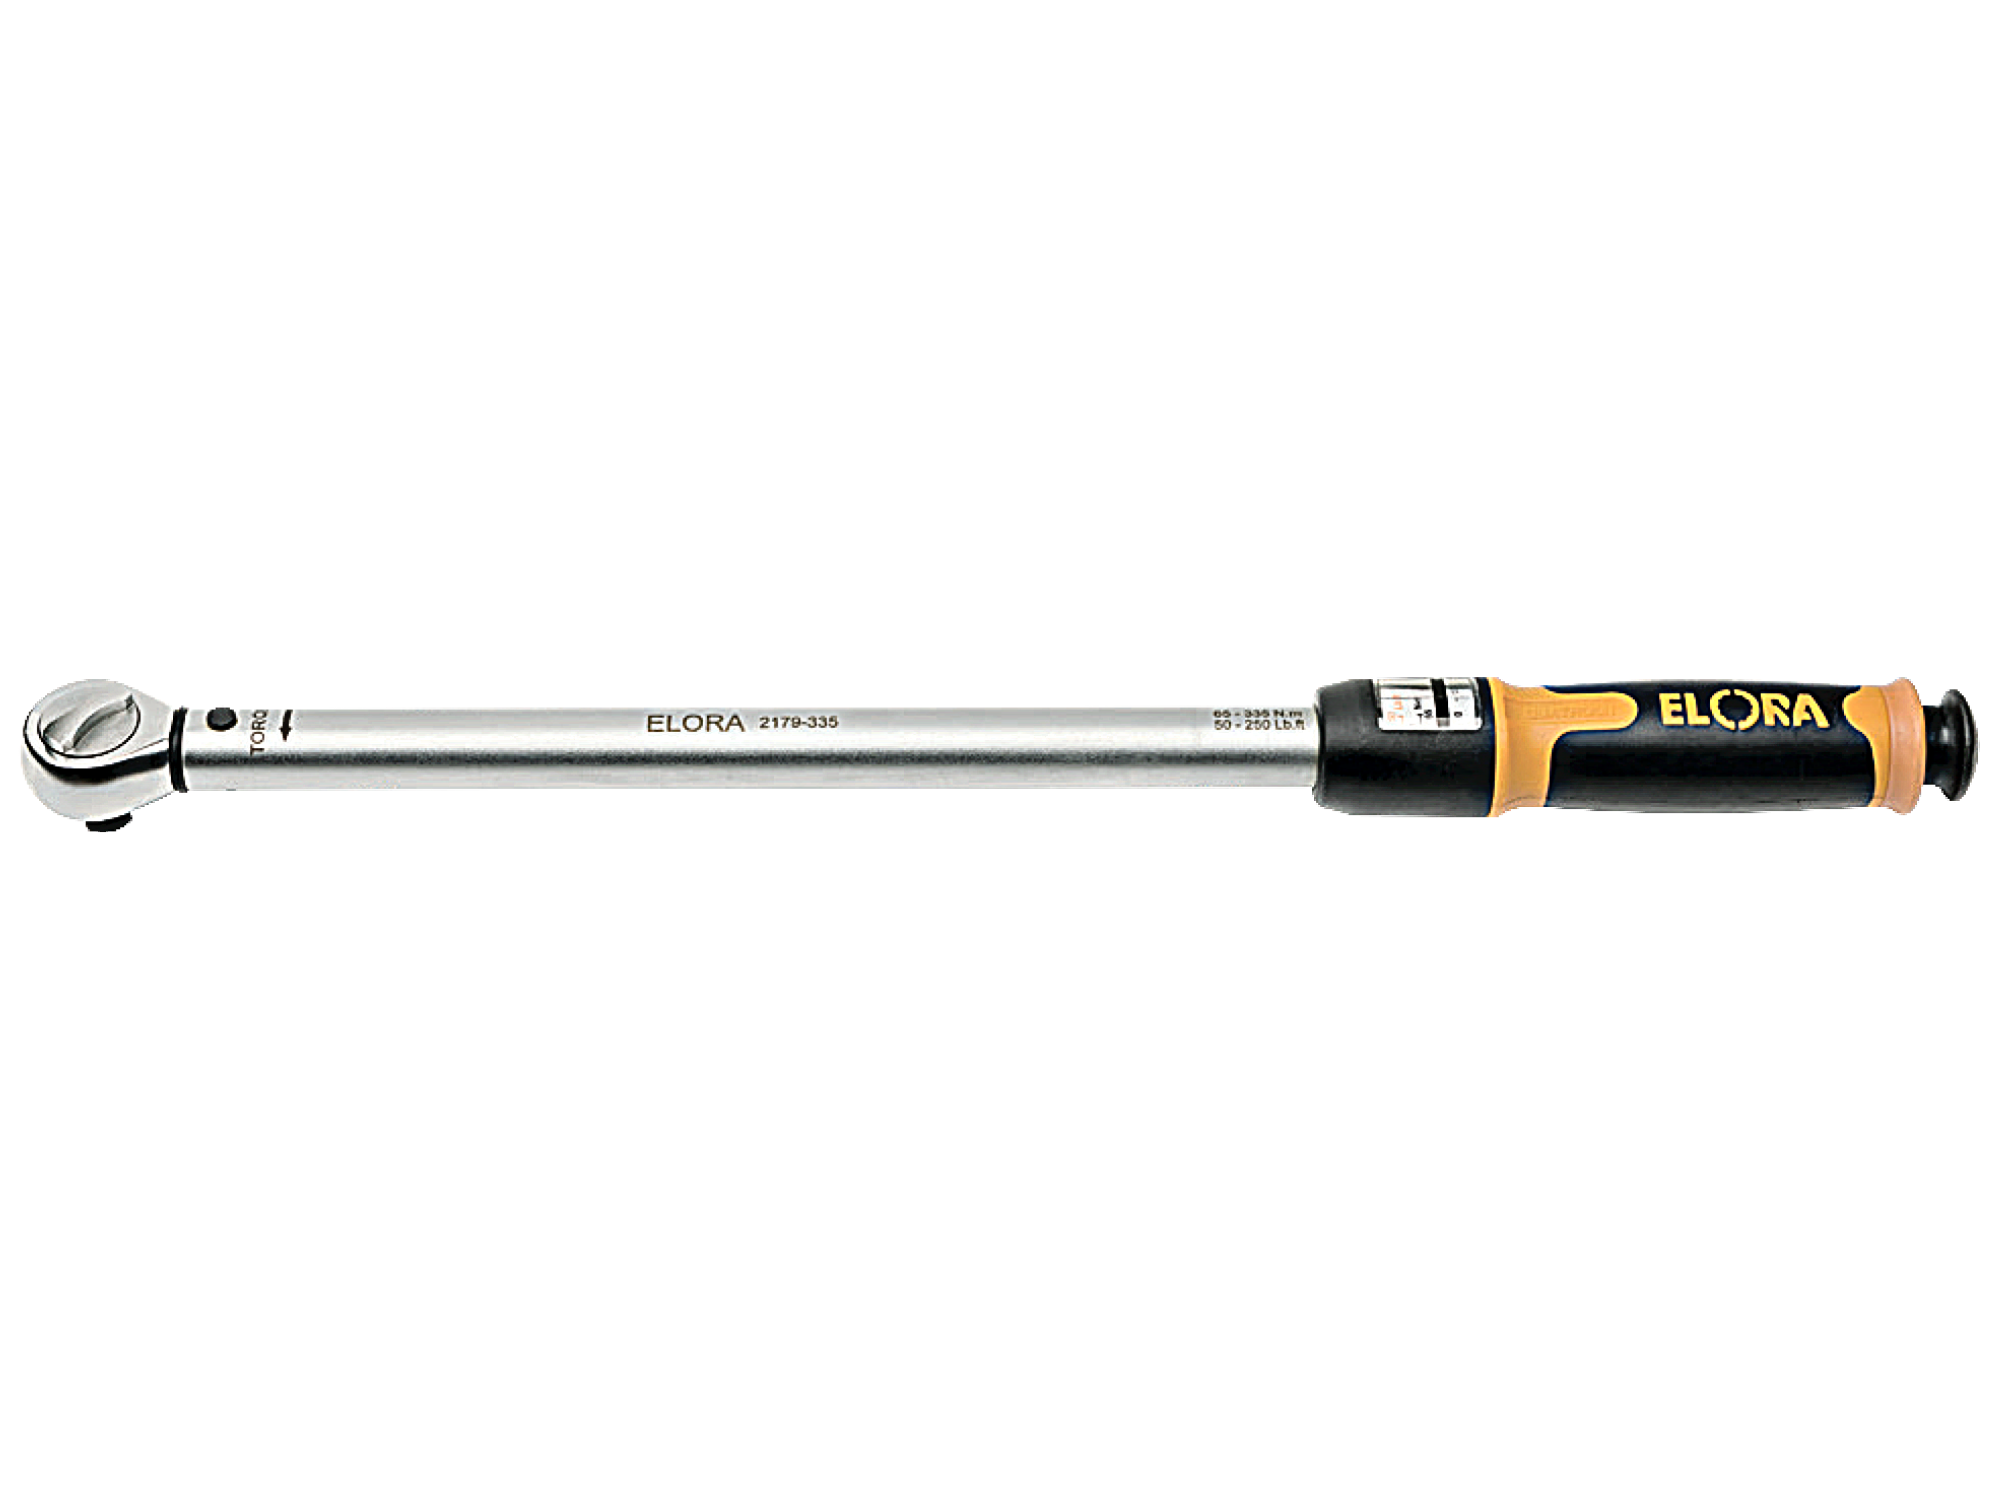 ELORA 2179-125/200/335 1/2" Torque Wrench With Vernier Scale - Premium 1/2" Torque Wrench from ELORA - Shop now at Yew Aik.